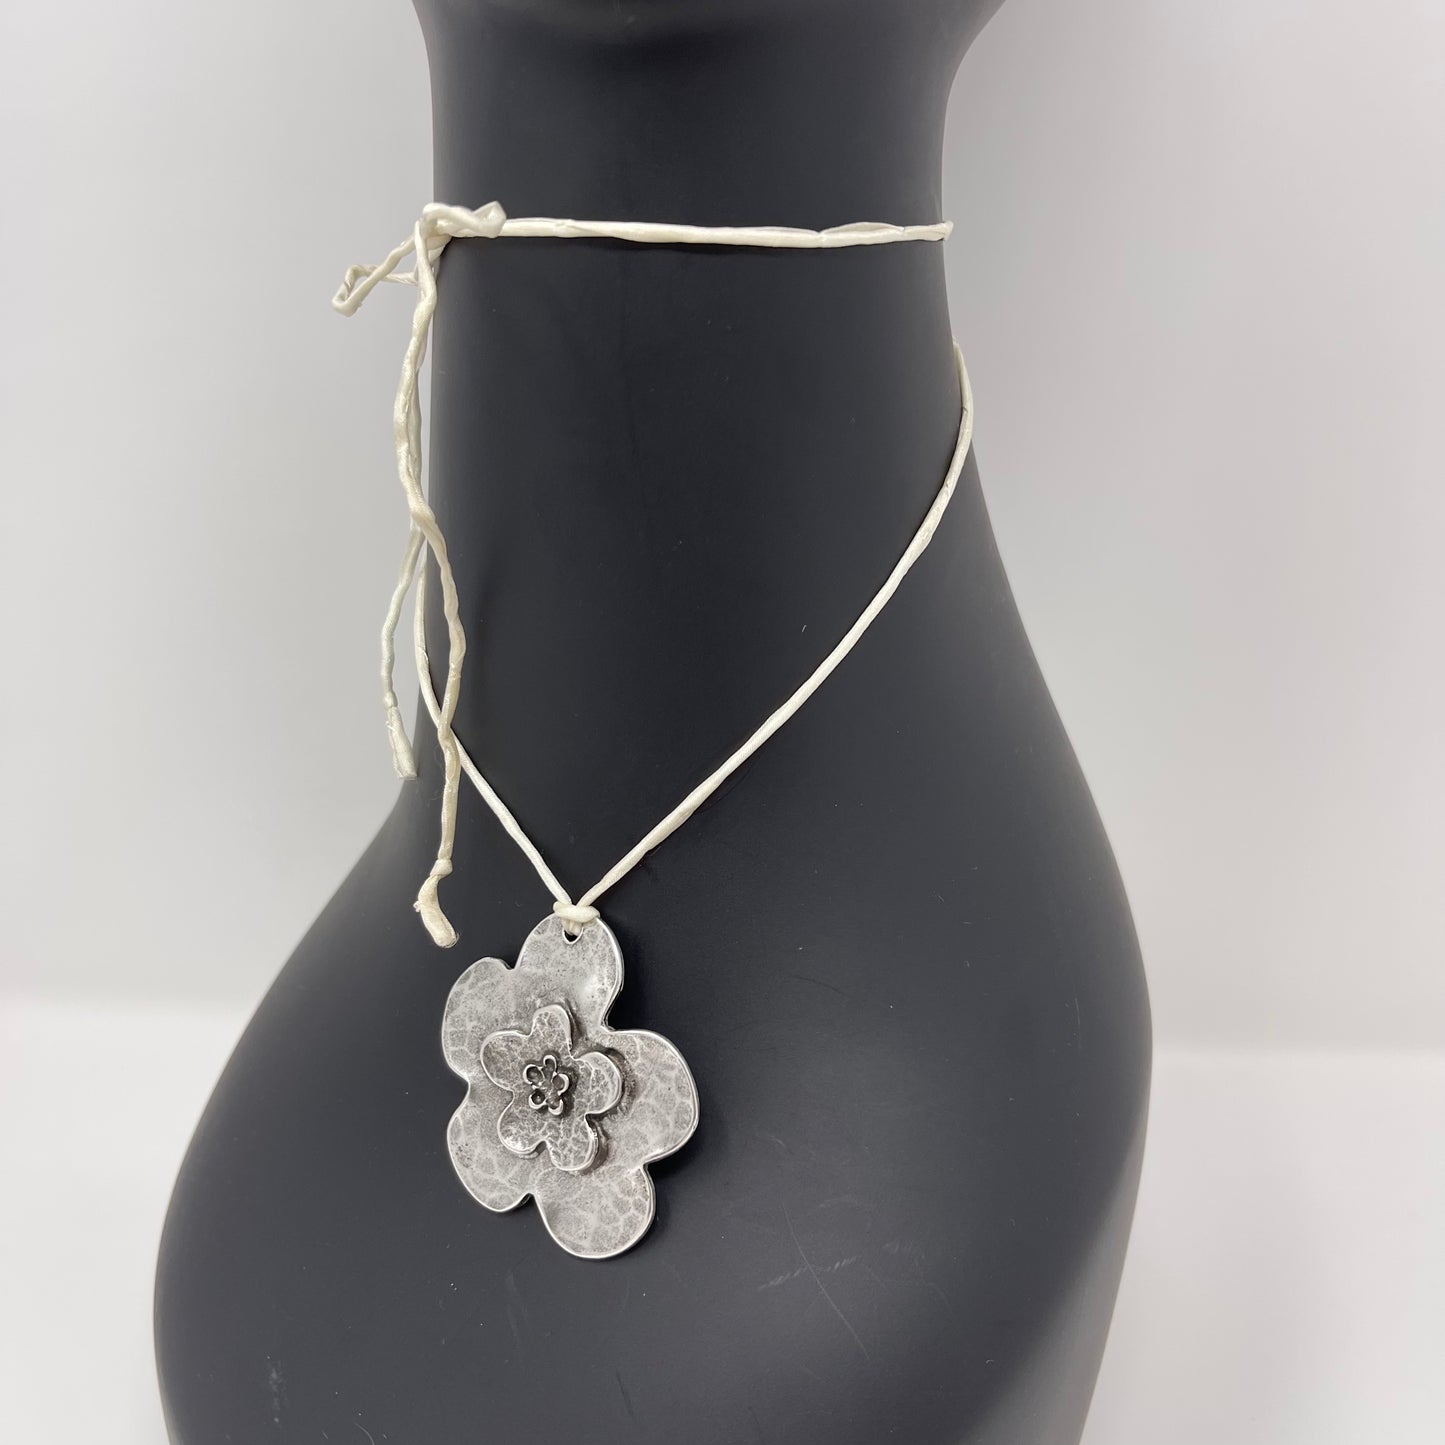 Silver Flower Pendant Necklace - Ivory White